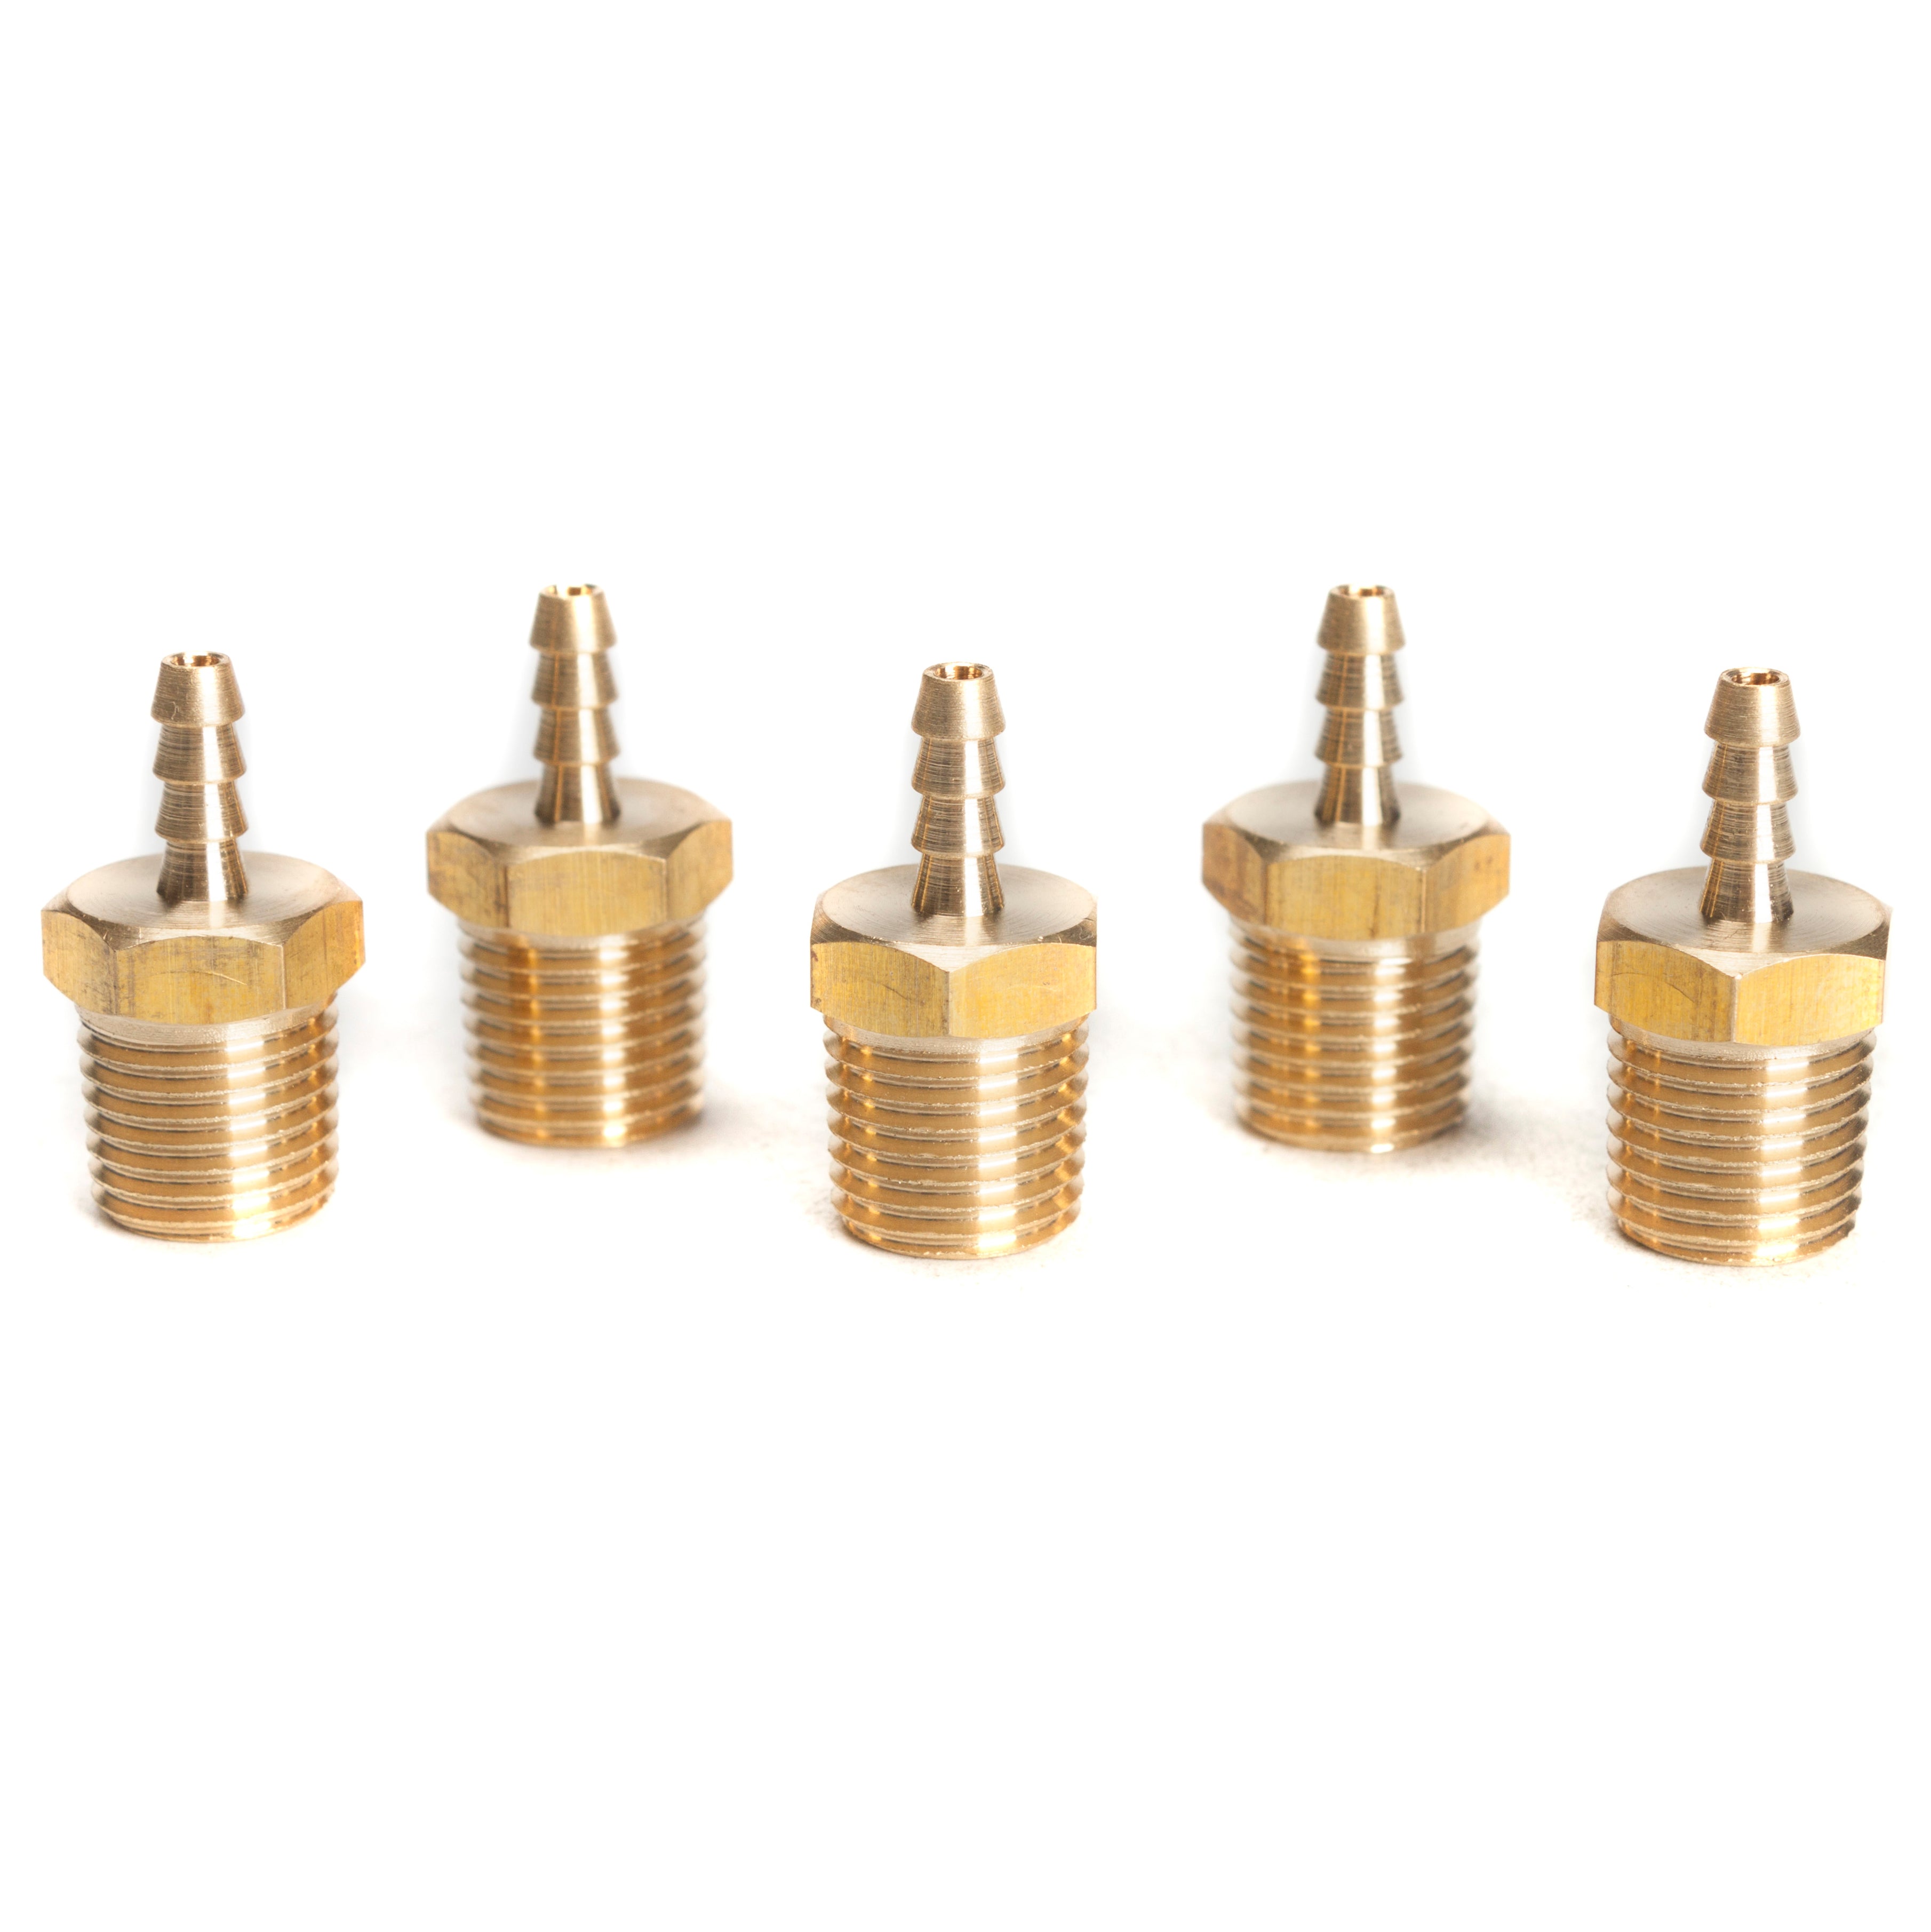 LTWFITTING Lead Free Brass Barbed Fitting Coupler/Connector 1/8 Inch Hose Barb x 1/4 Inch Male NPT Fuel Gas Water (Pack of 5)